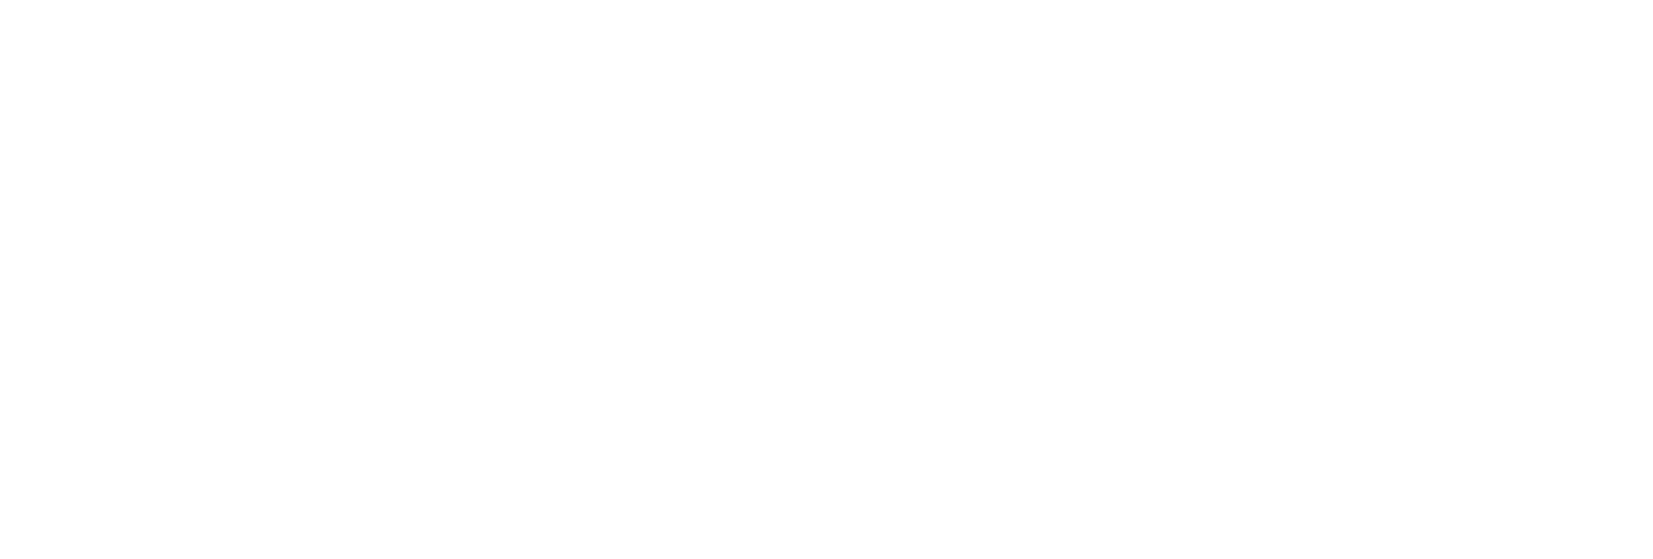 Cato Fashion logo for dark backgrounds (transparent PNG)